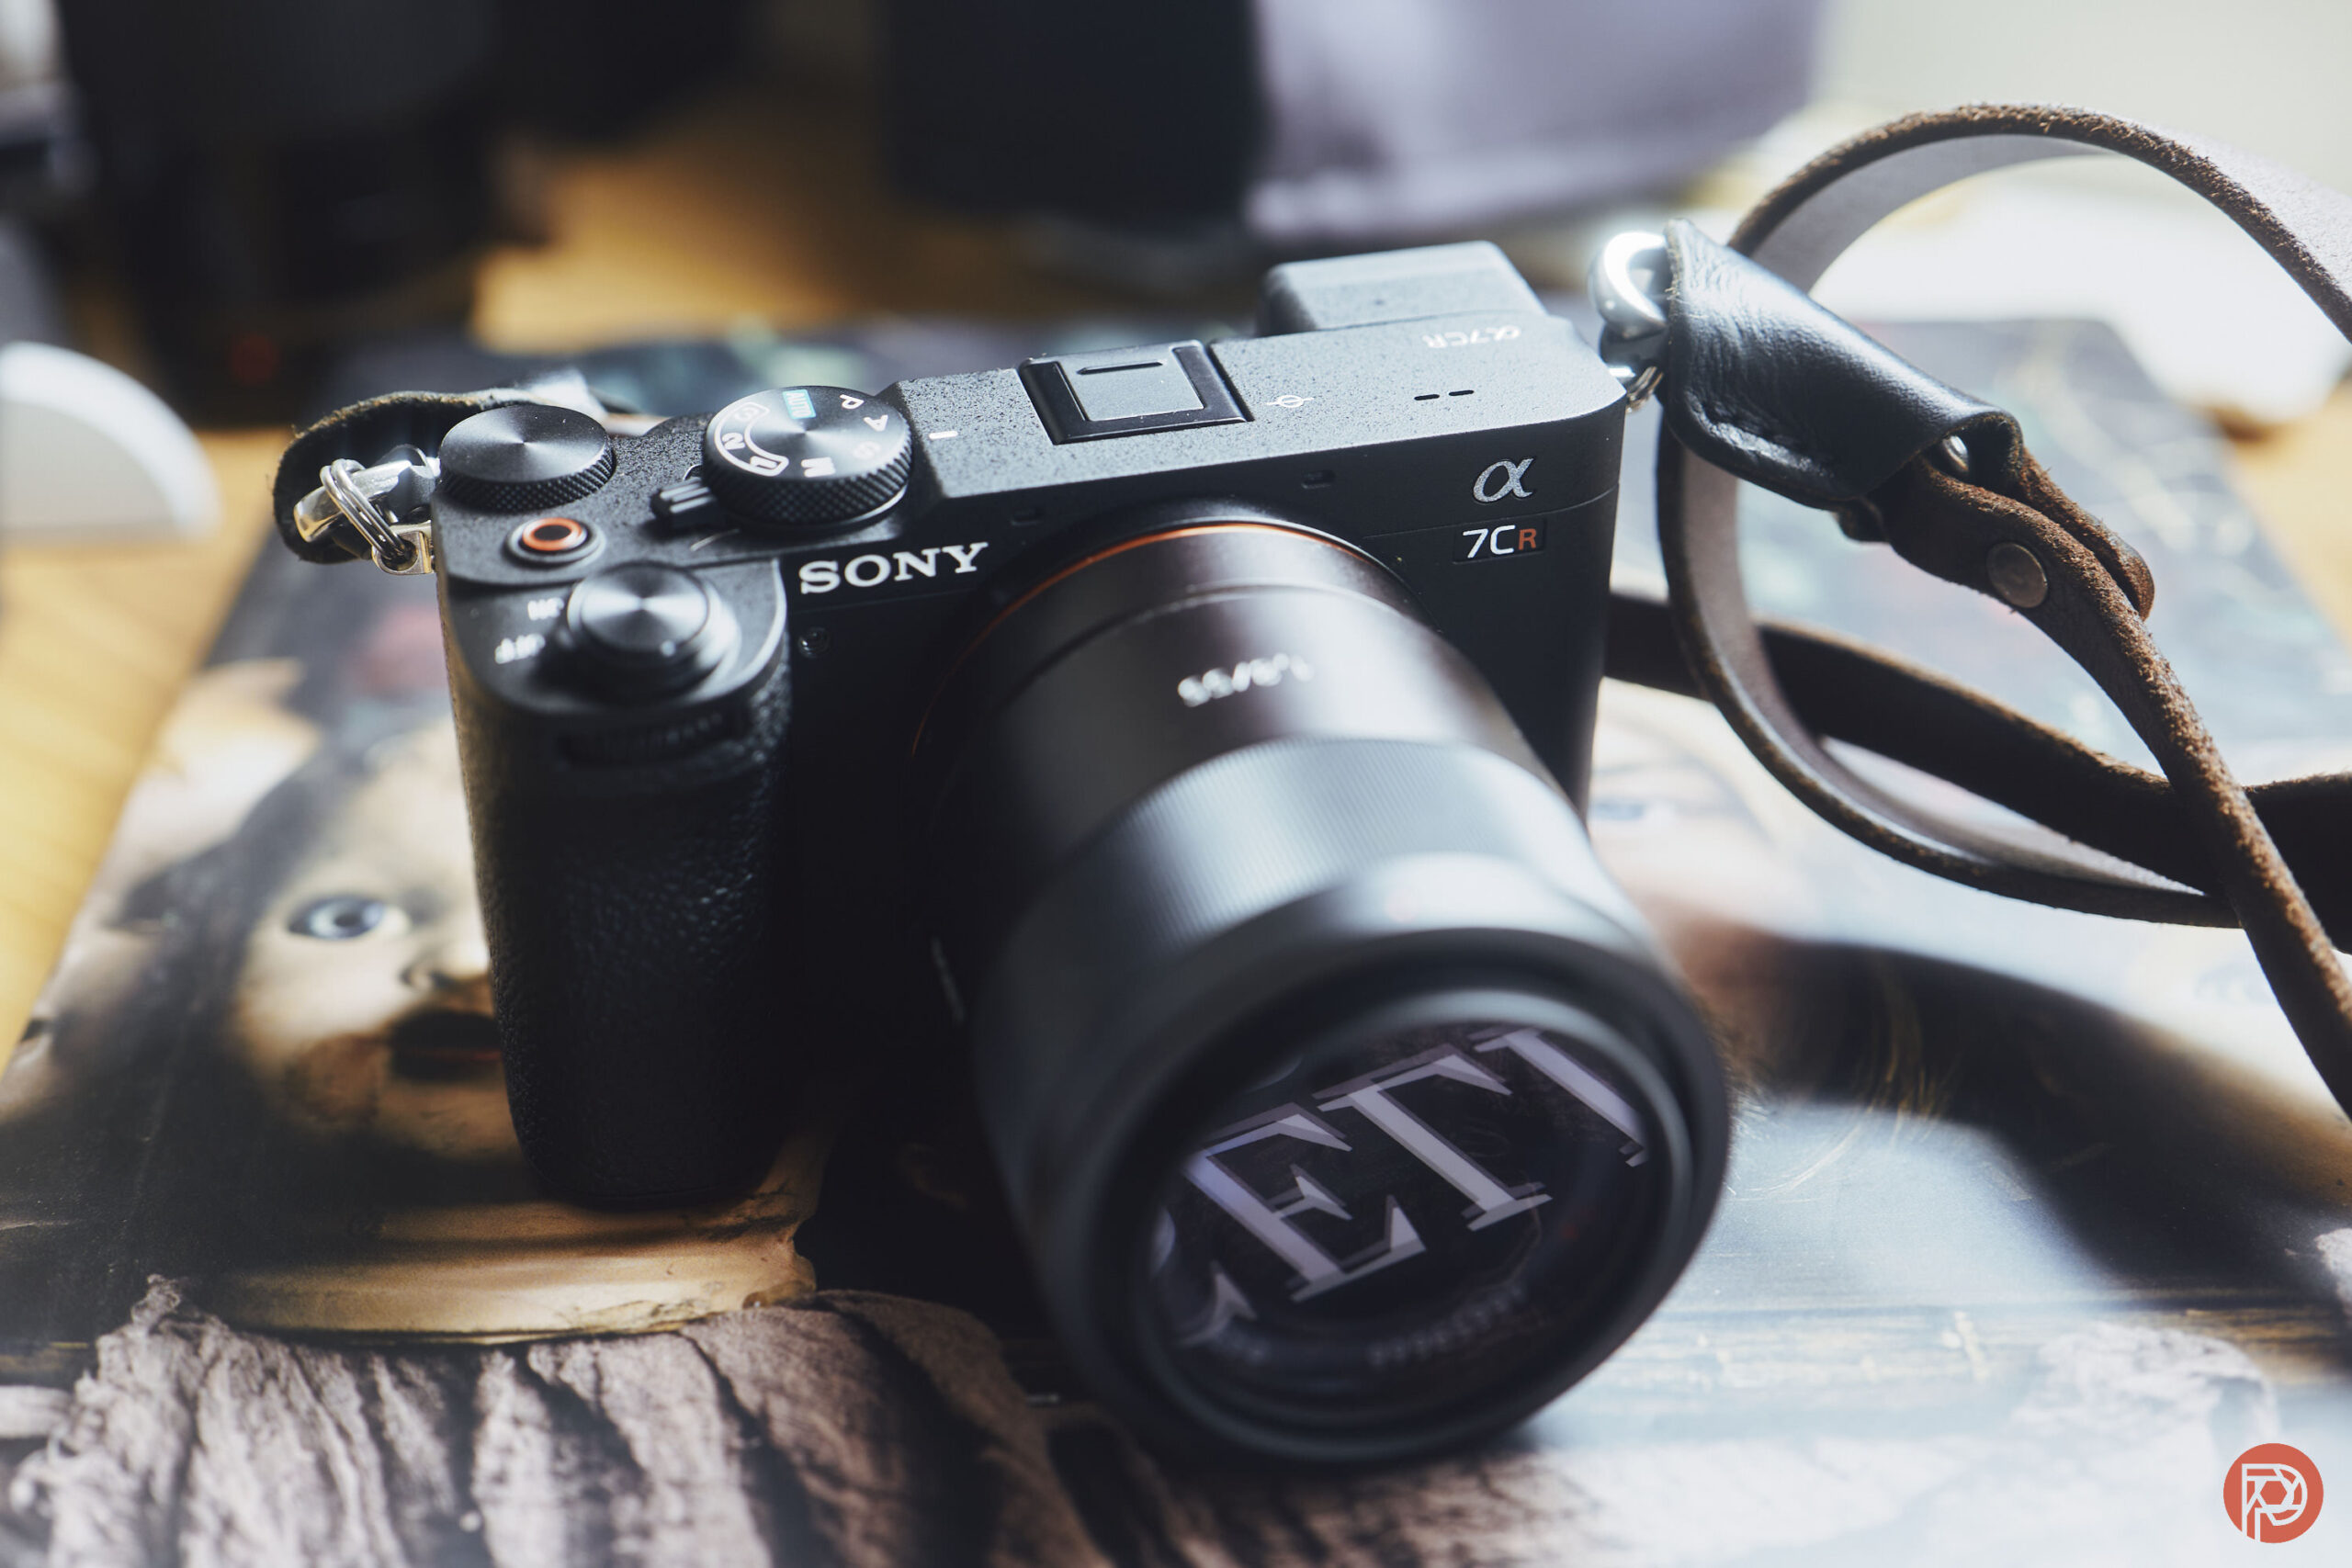 Chris Gampat The Phoblographer Sony a7cR review product images 3.51-50s200